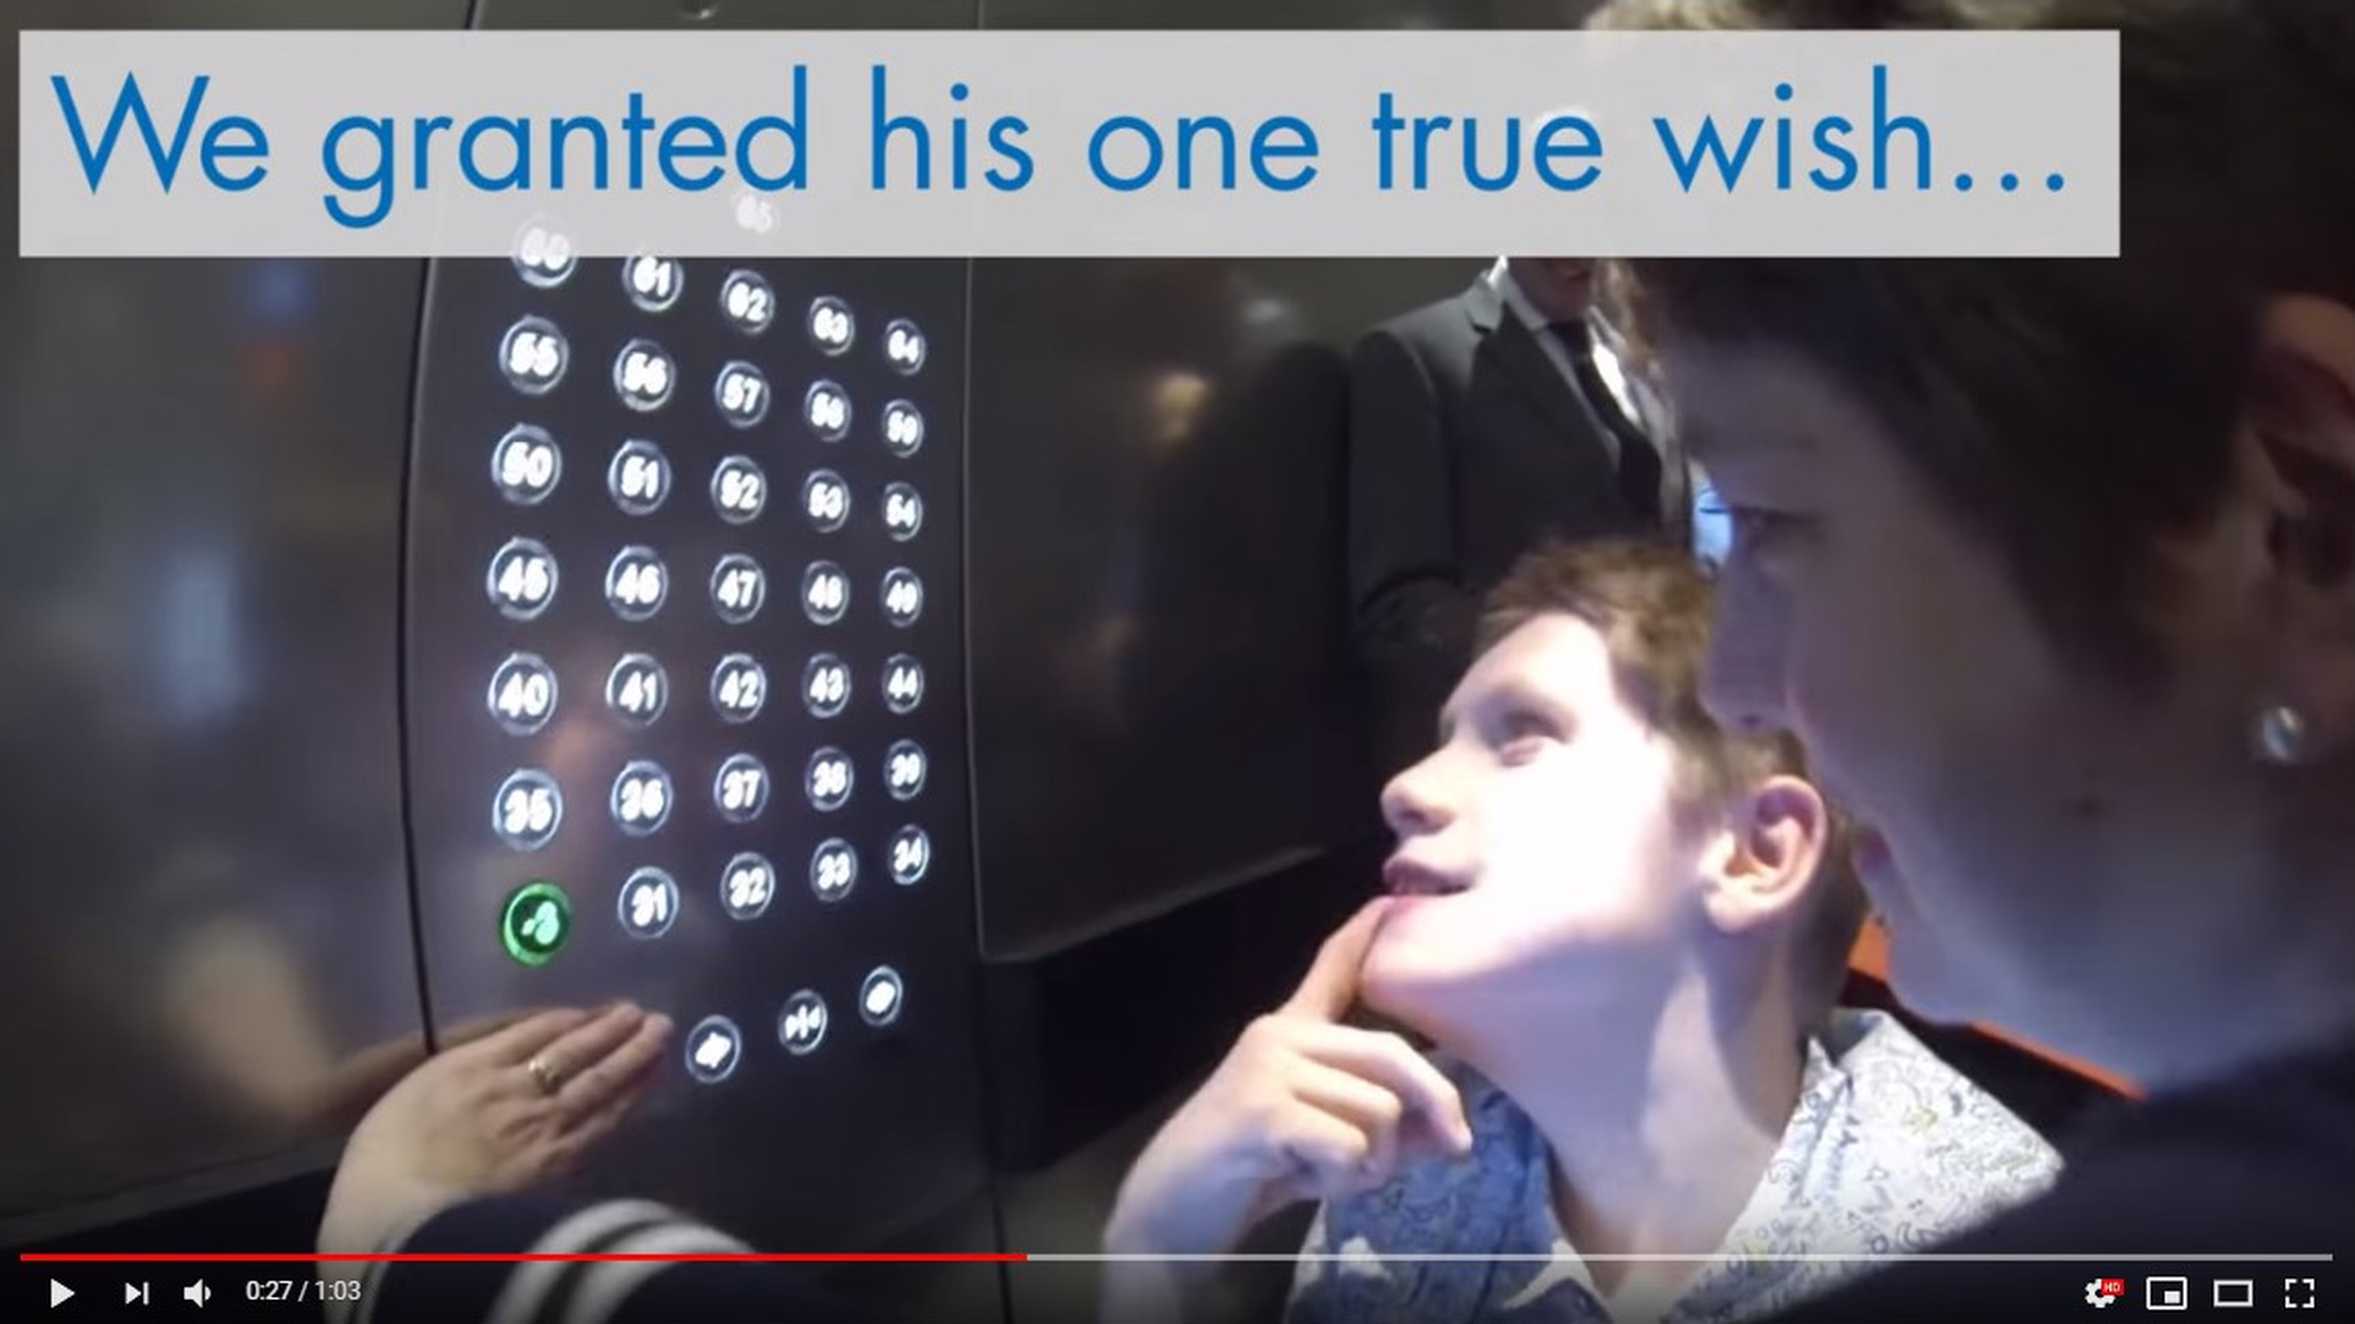 Wish child, James choosing which floor to go to on his wish to be a lift operator.